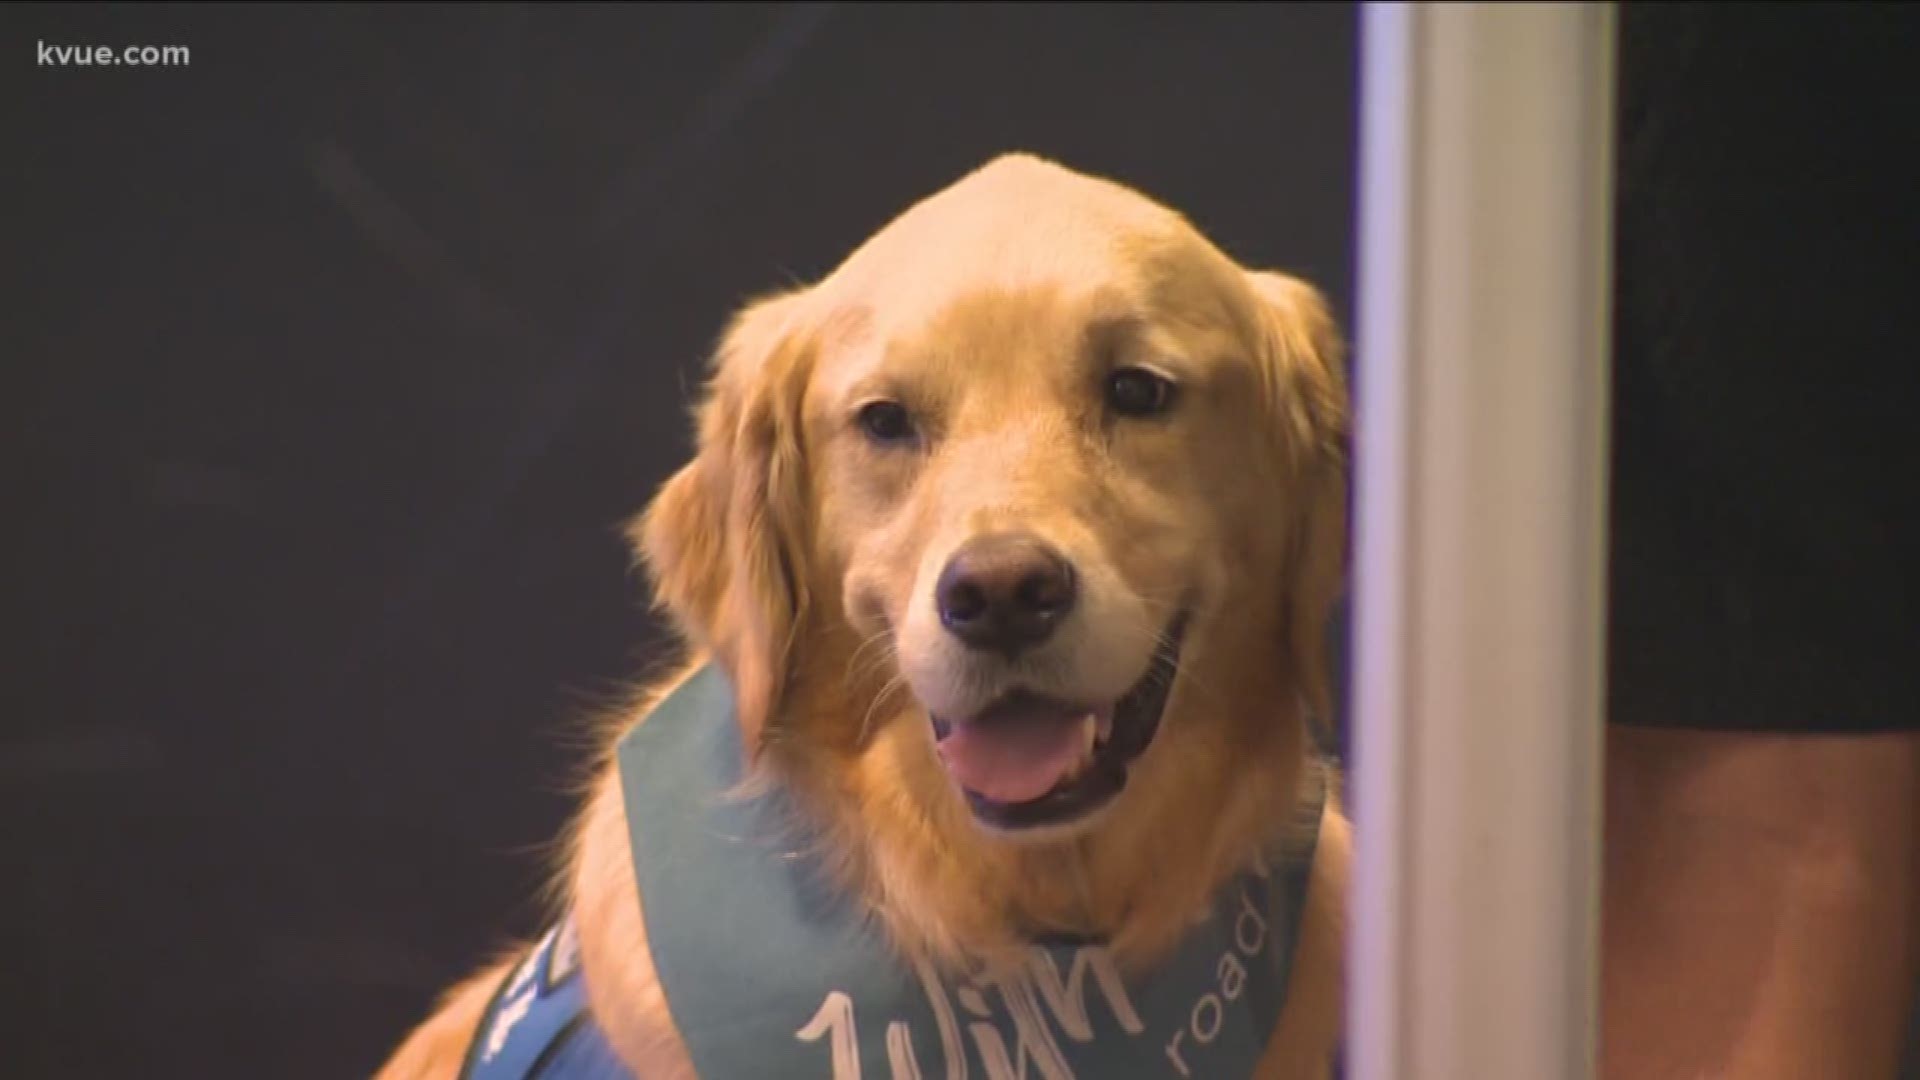 Two Austin four-legged friend flew to El Paso to give emotional support and healing for victims of the recent mass shooting.